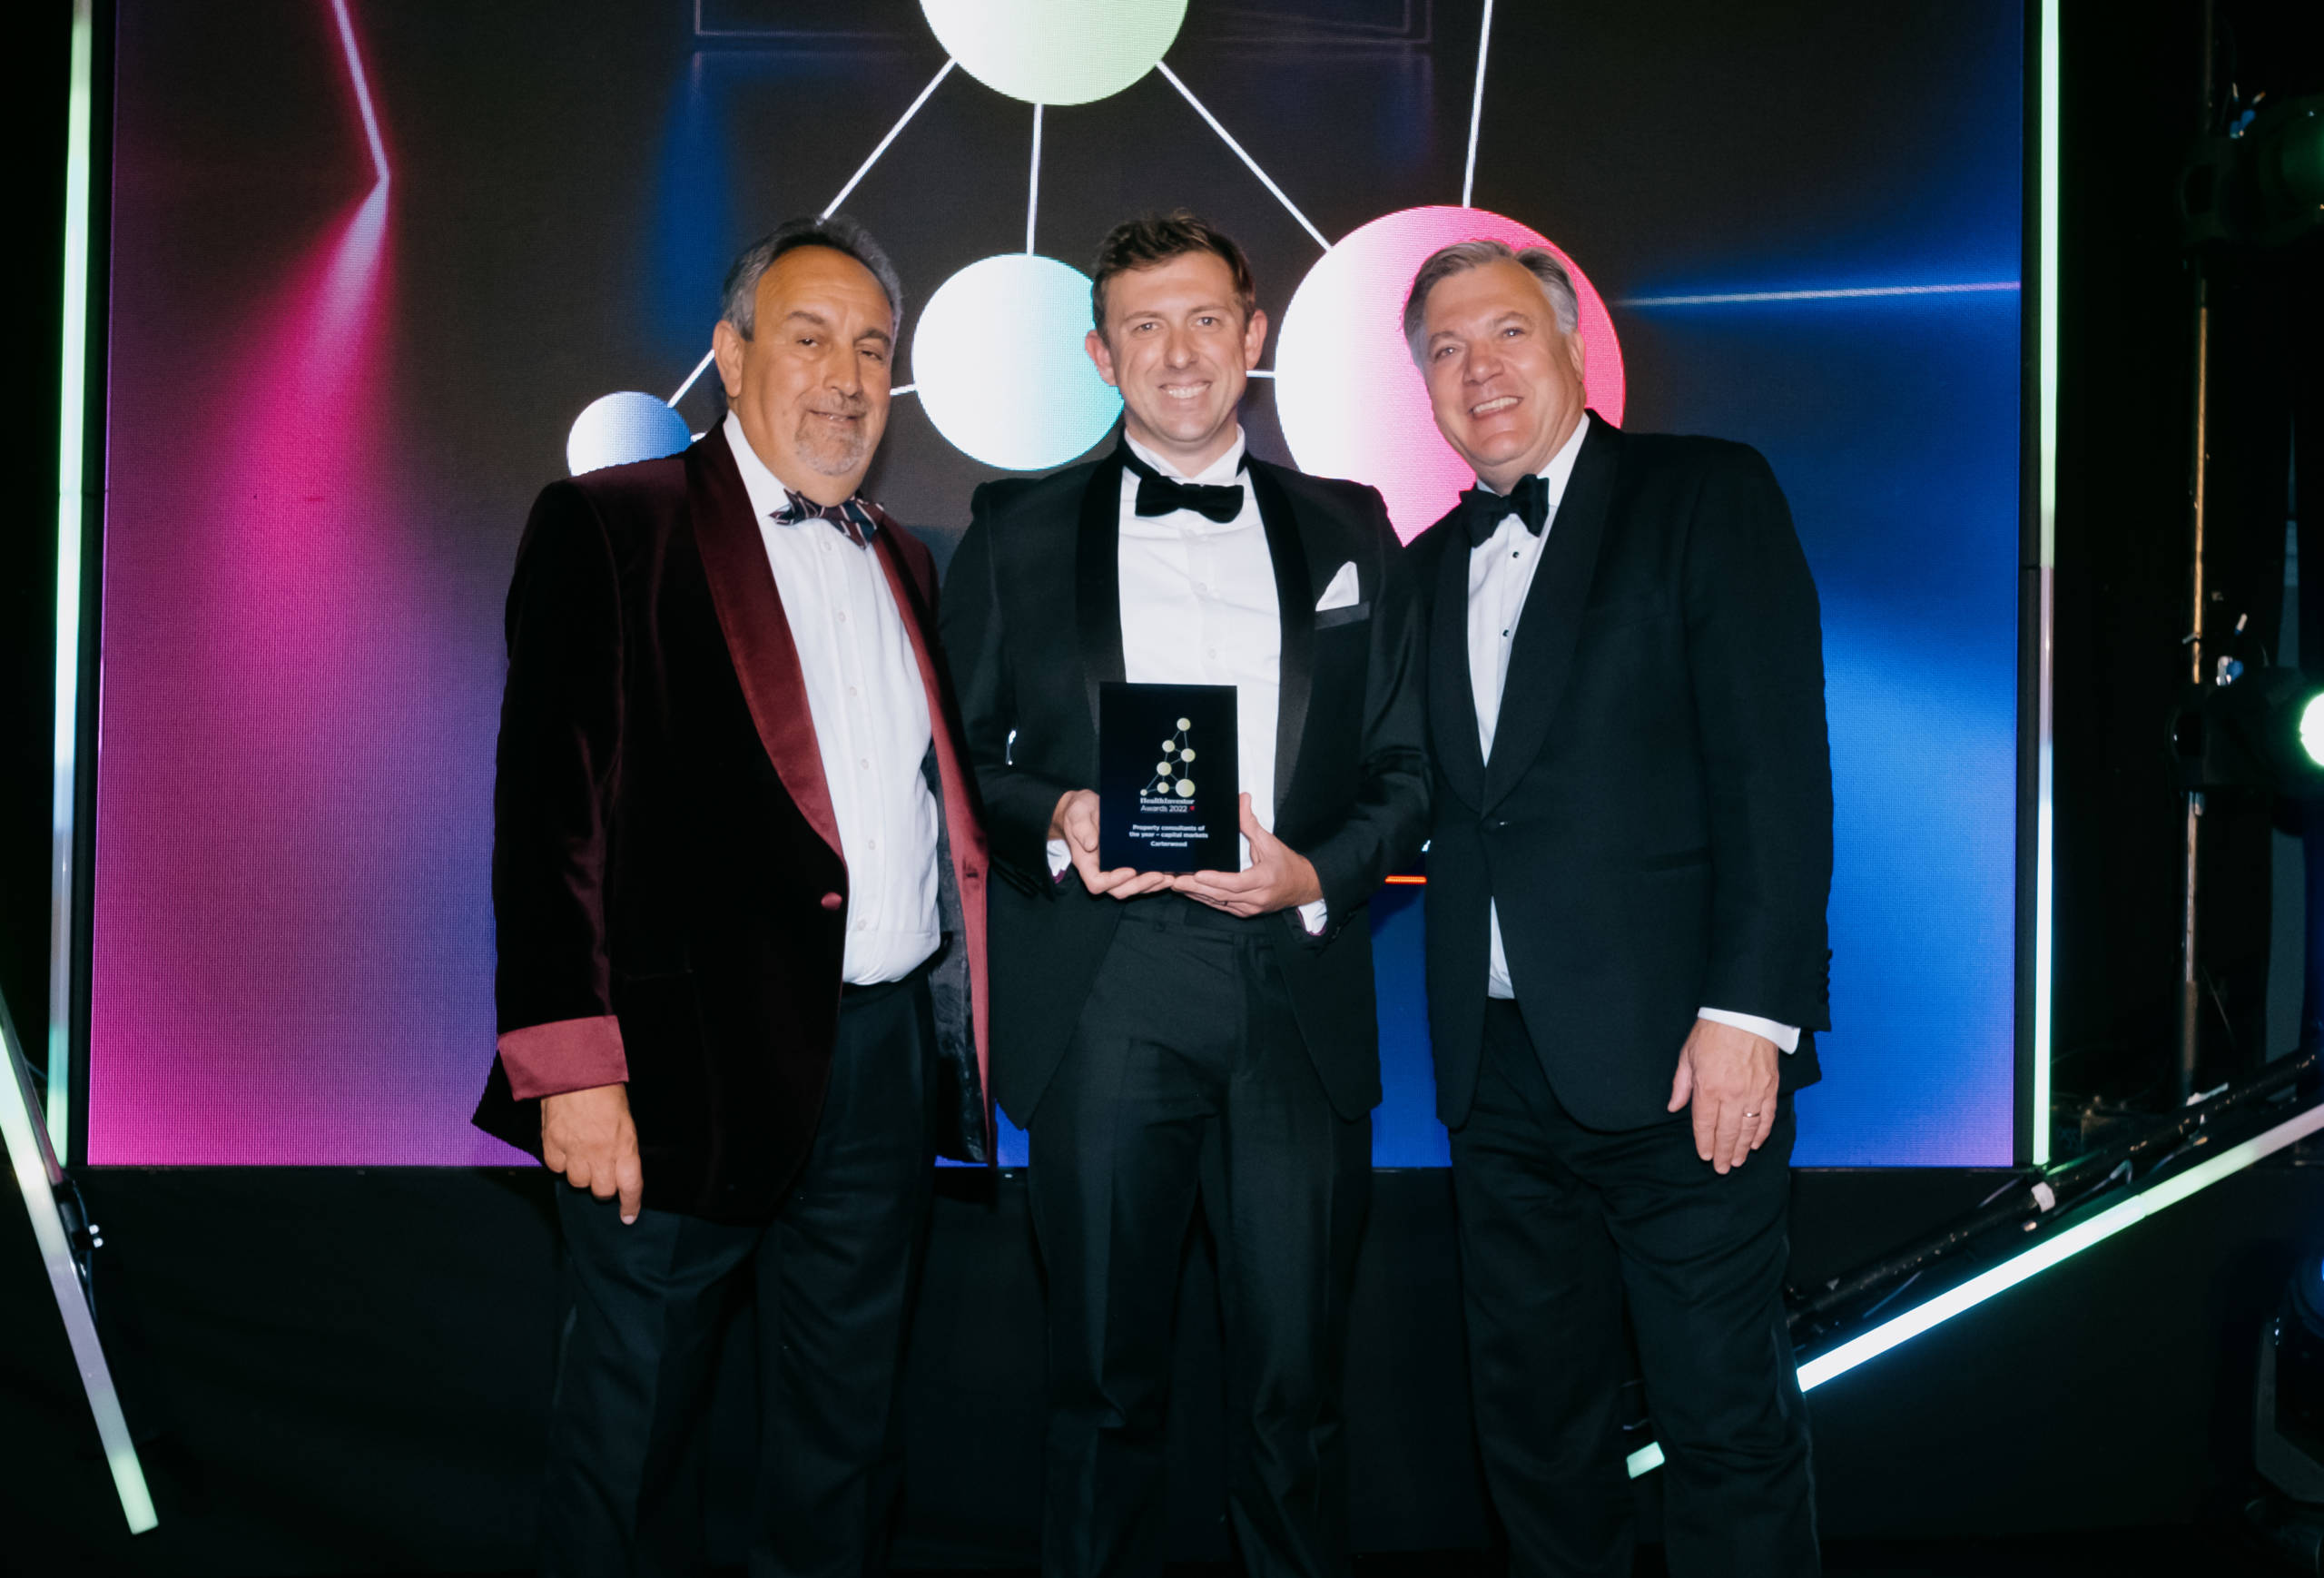 Tom Hartley, managing director at Carterwood (centre) with Harry Hyman, publisher at Investor Publishing (left) and Ed Balls, broadcaster, writer, economist, professor and former politician (right) at the HealthInvestor Awards 2022